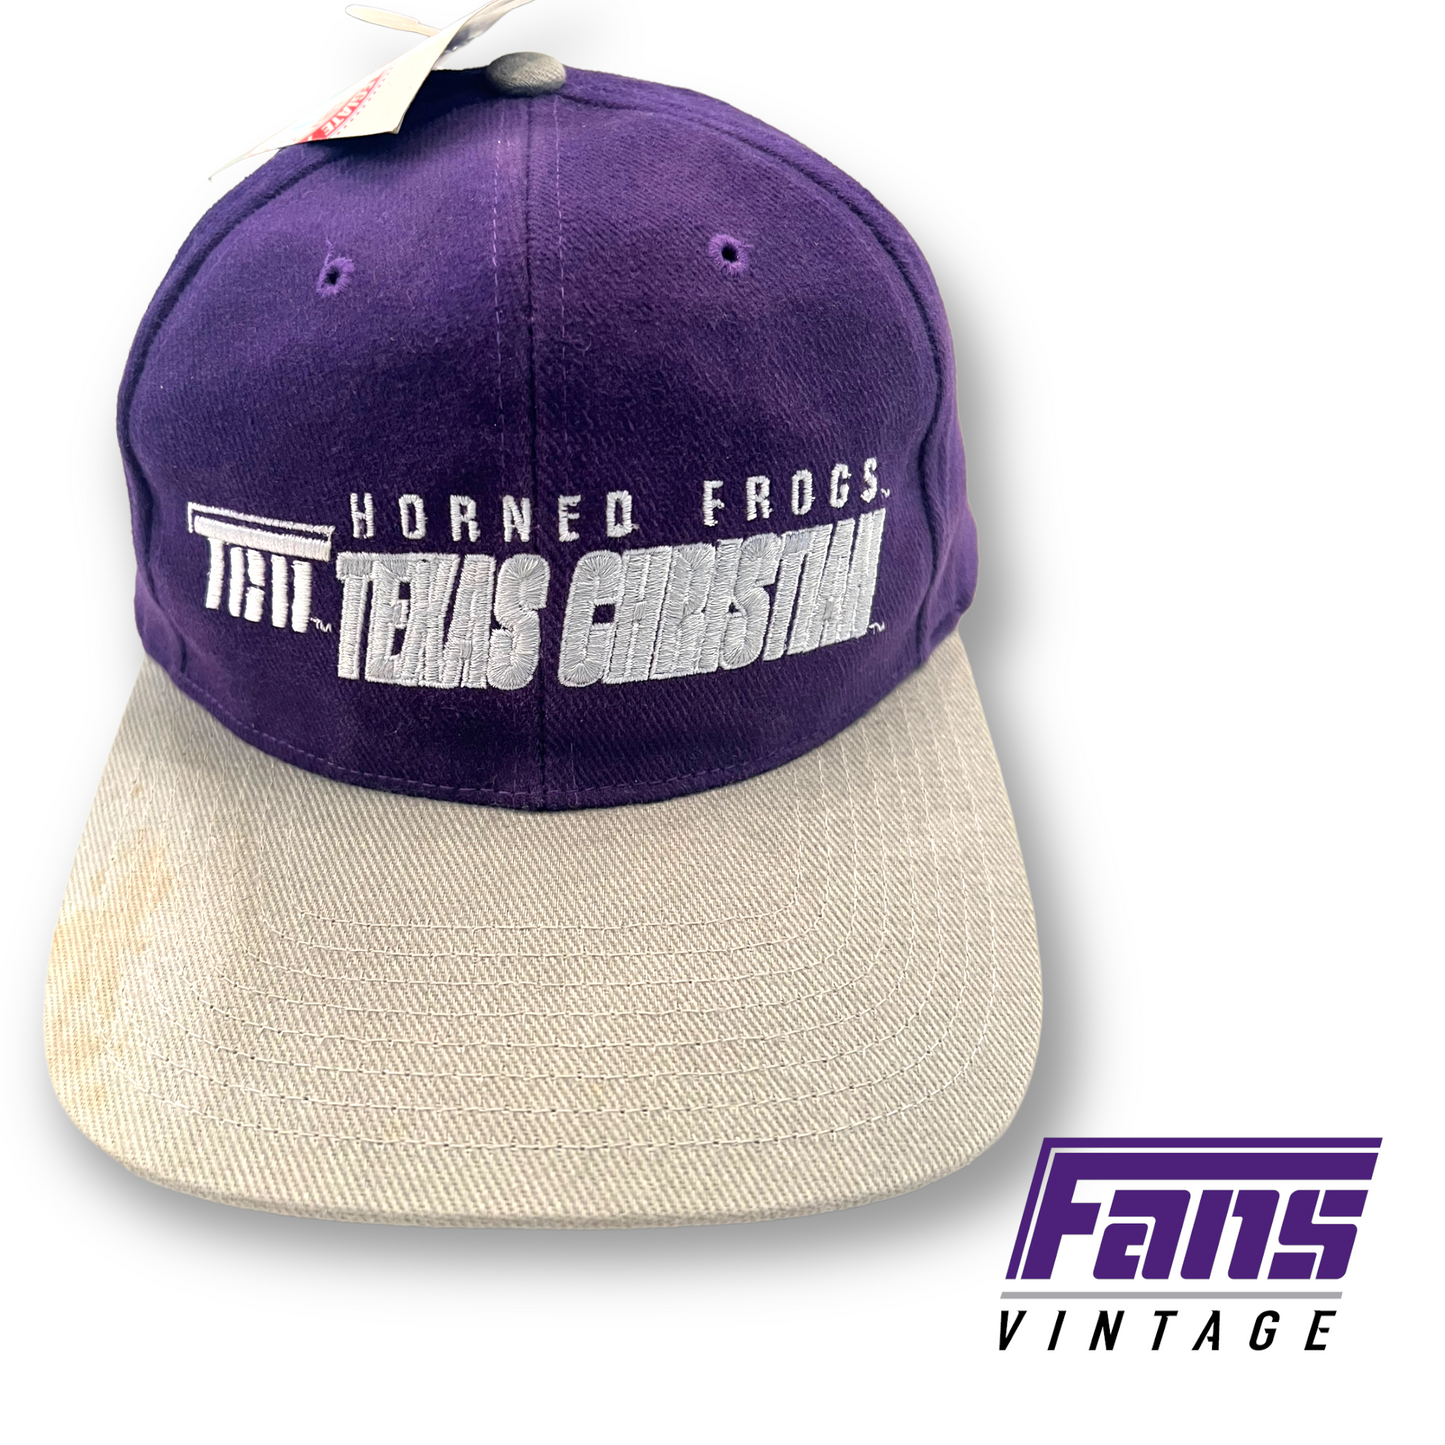 Vintage 90s TCU Flying T Hat - New with Tags - See condition!